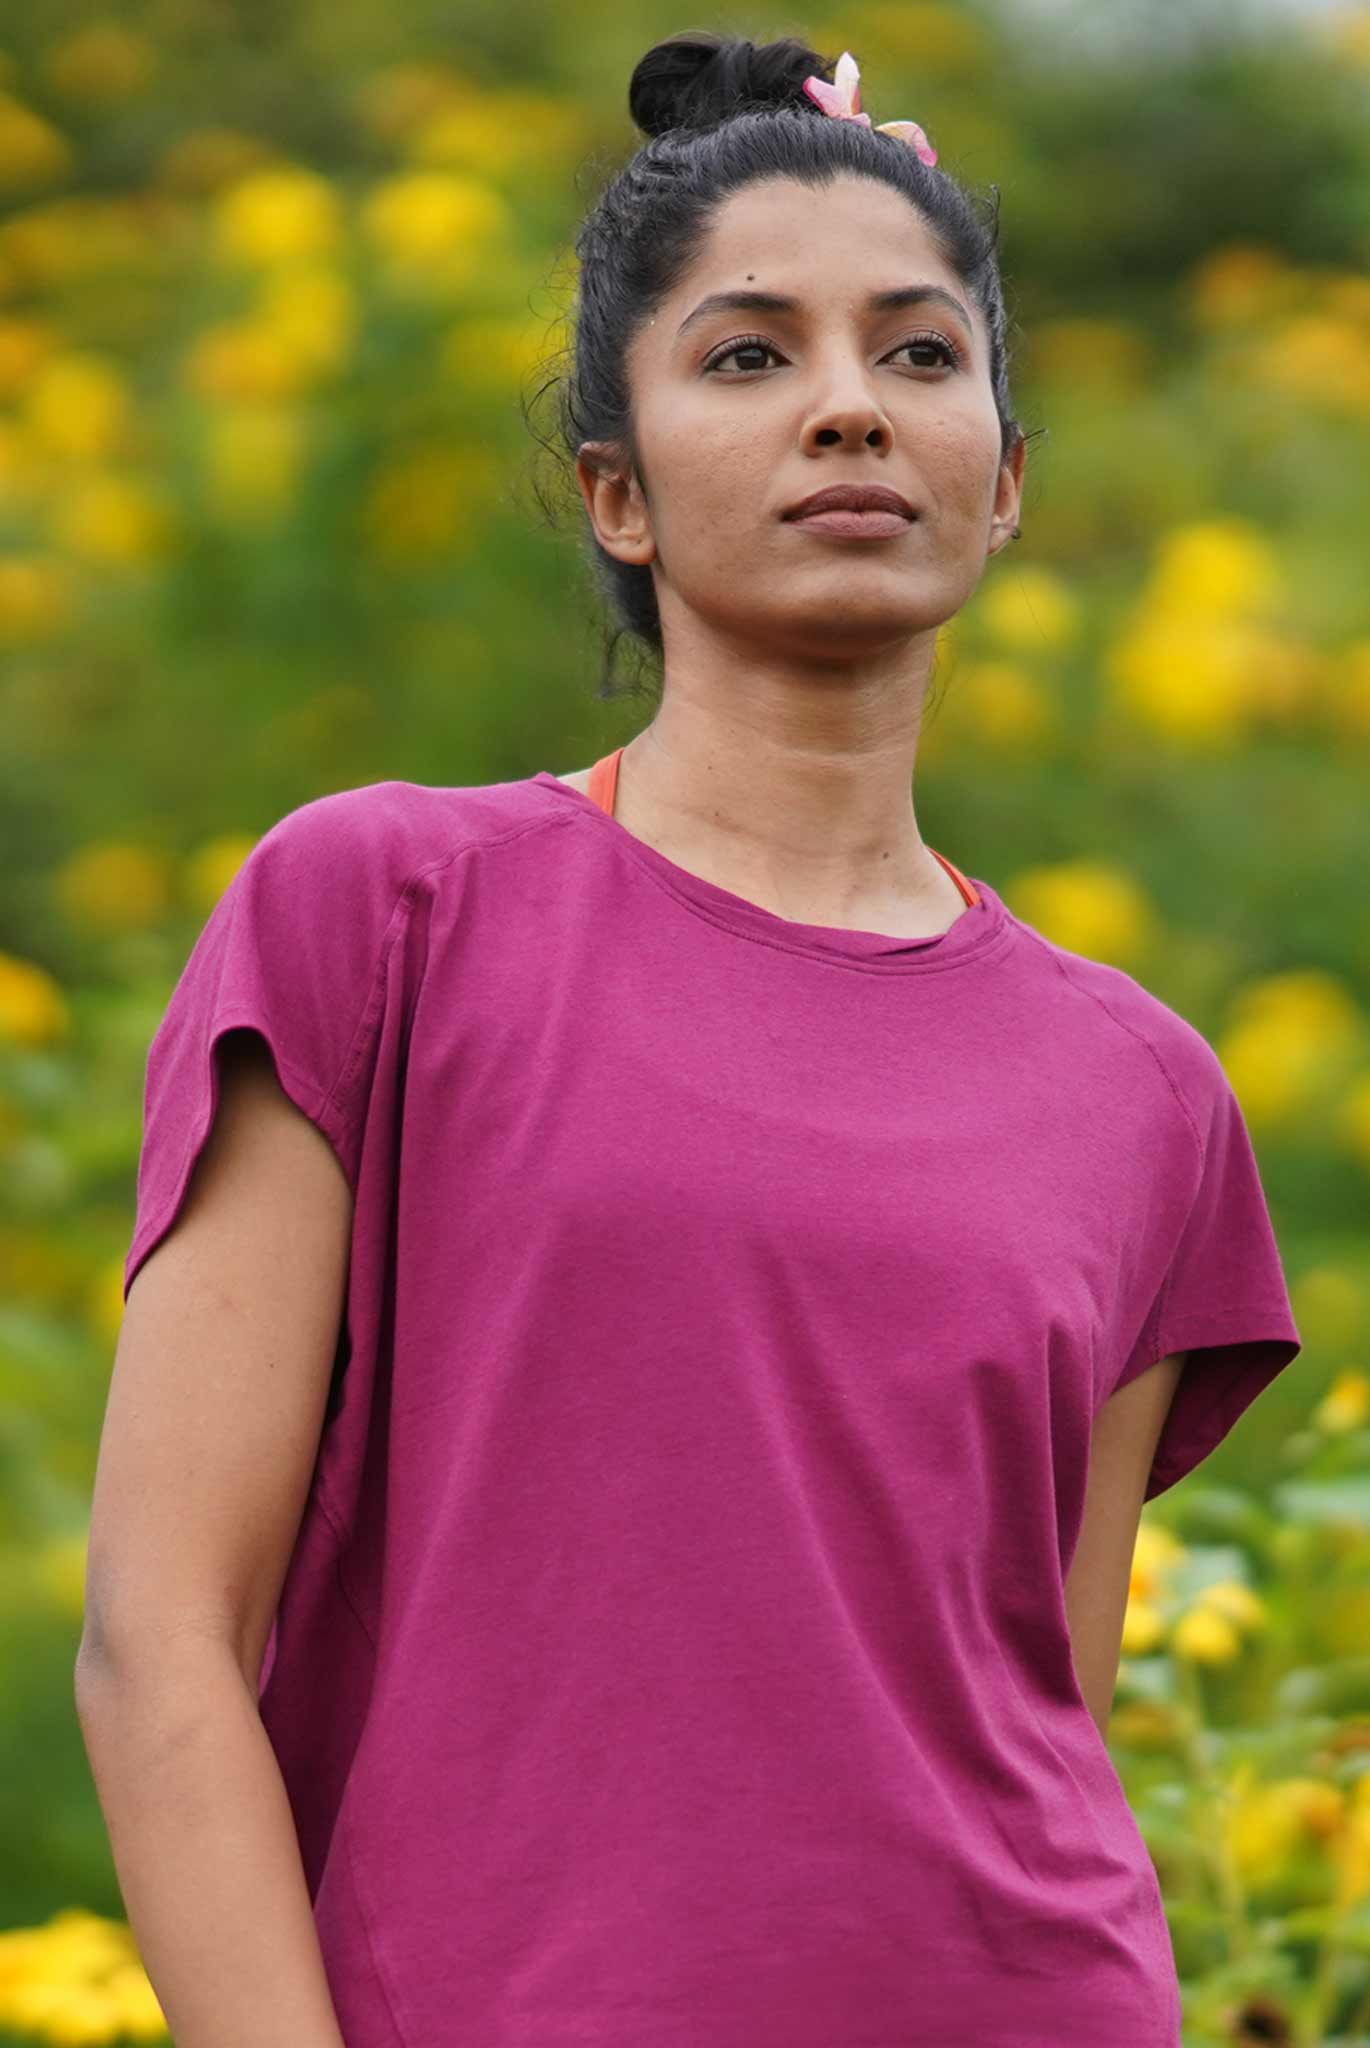 Yoga Racerback Tank Fitted Organic Cotton I Chin Scarlet - Proyog